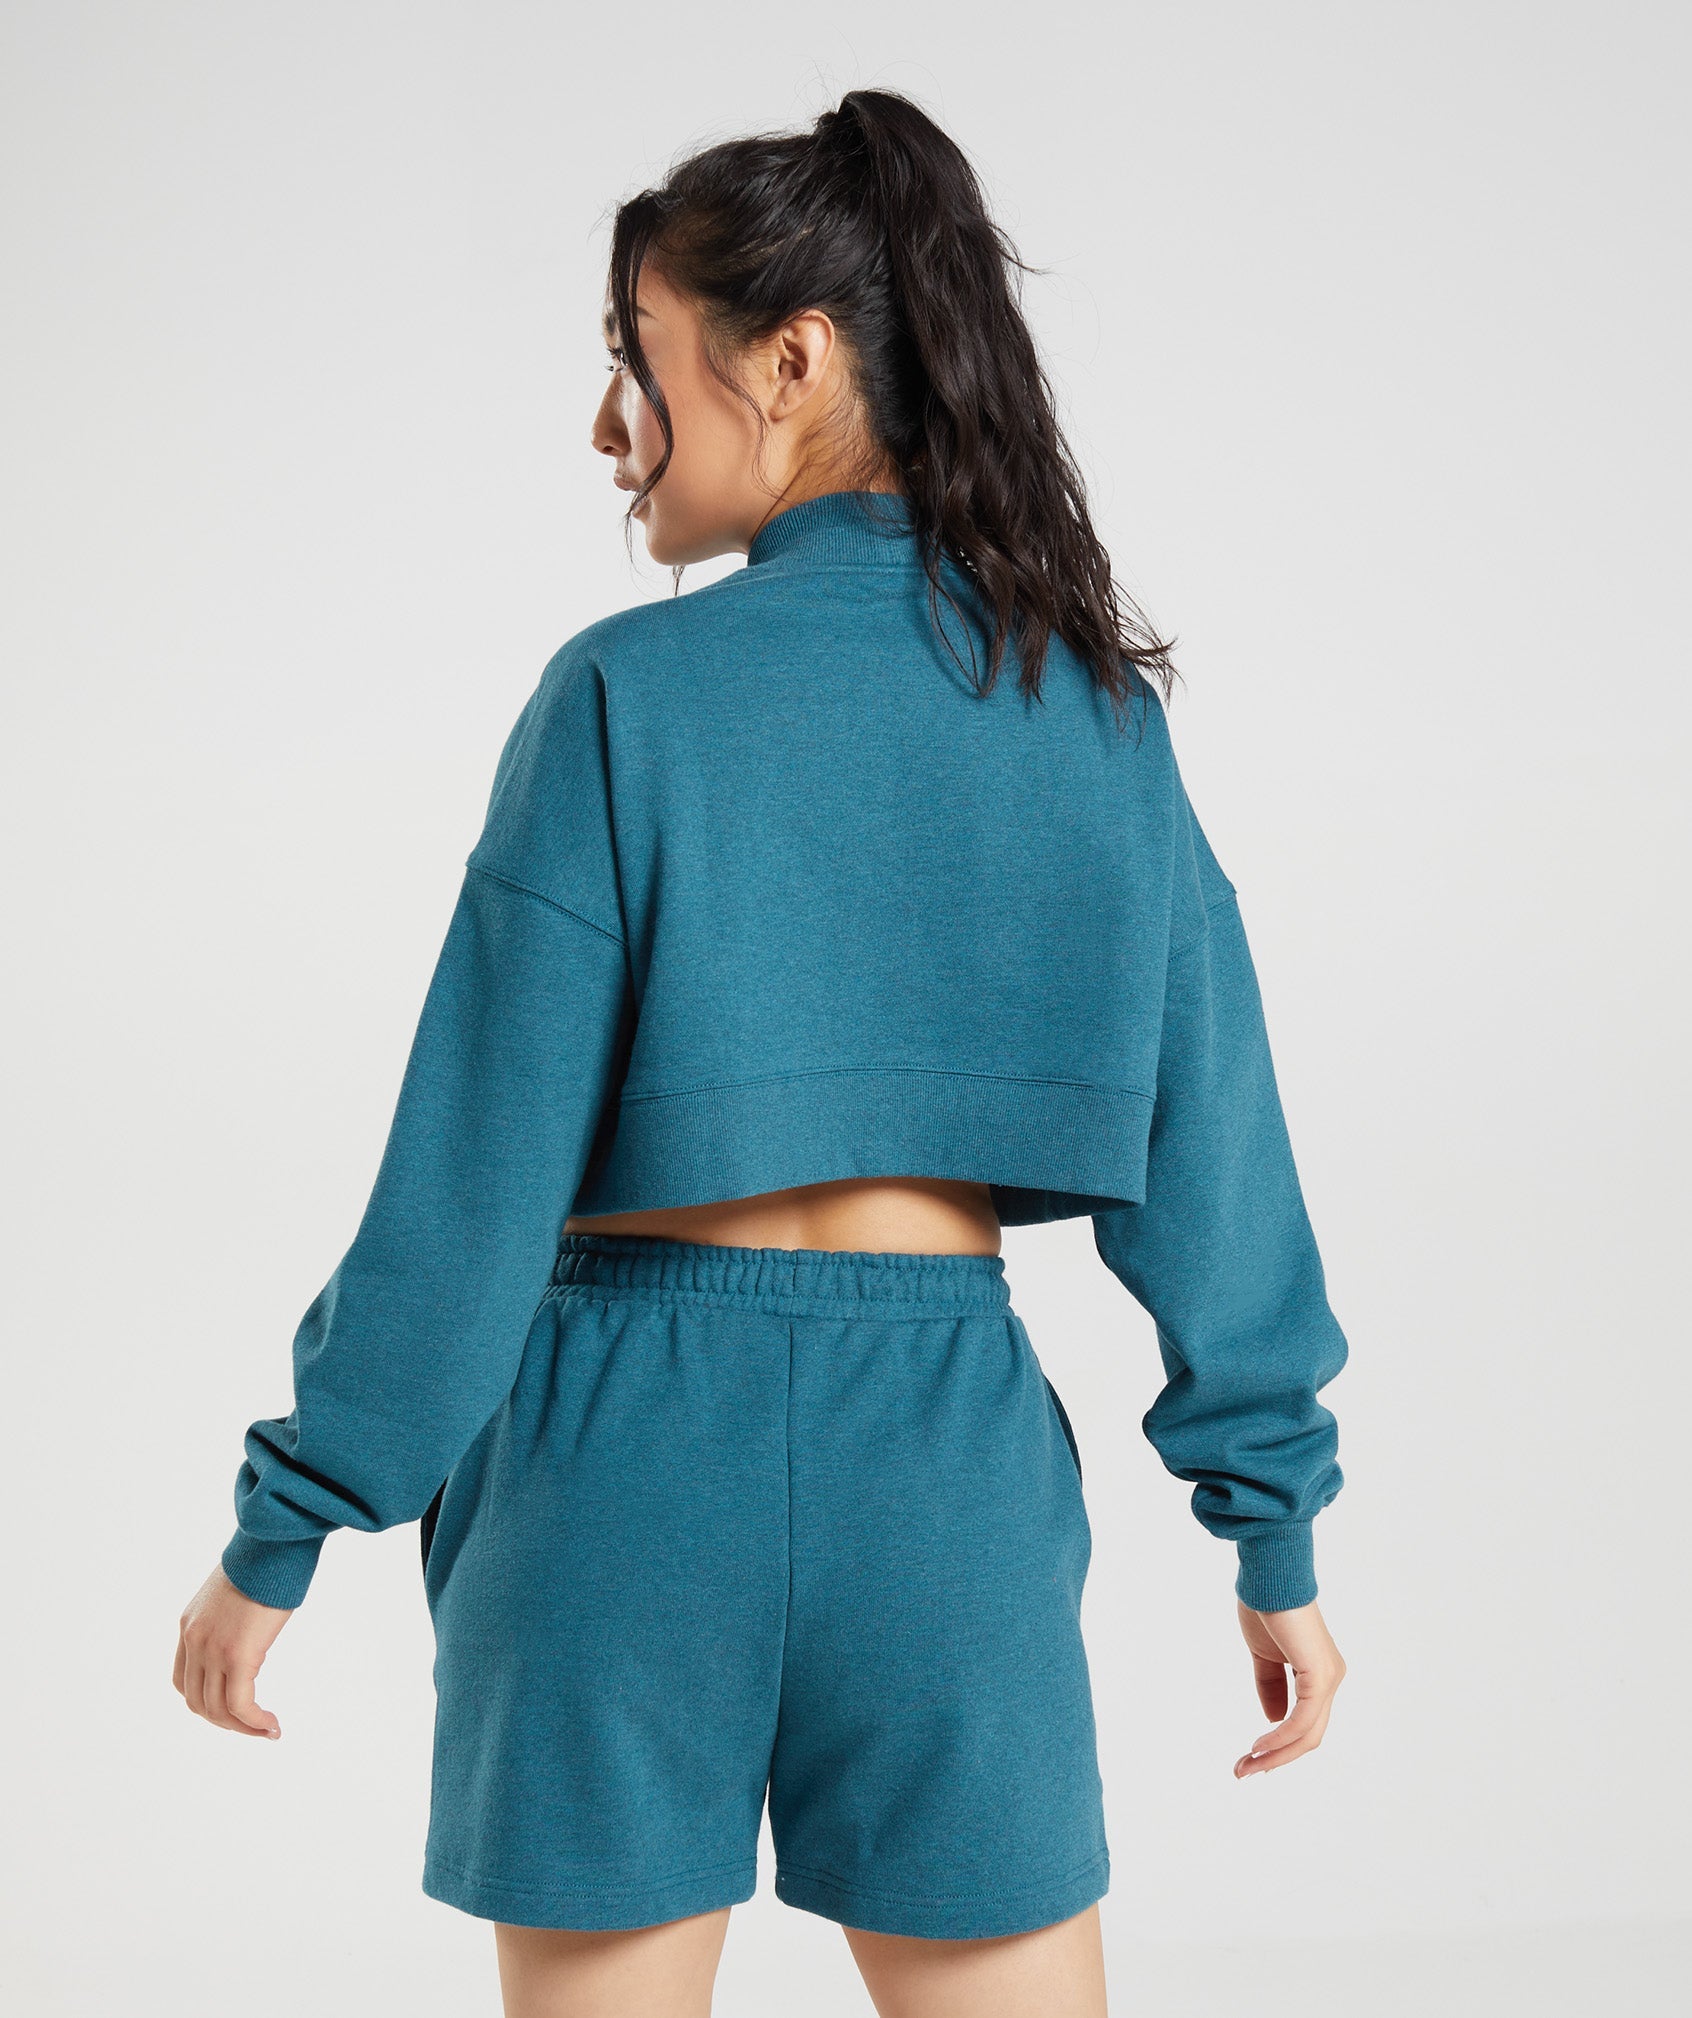 Rest Day Sweats Cropped Pullover